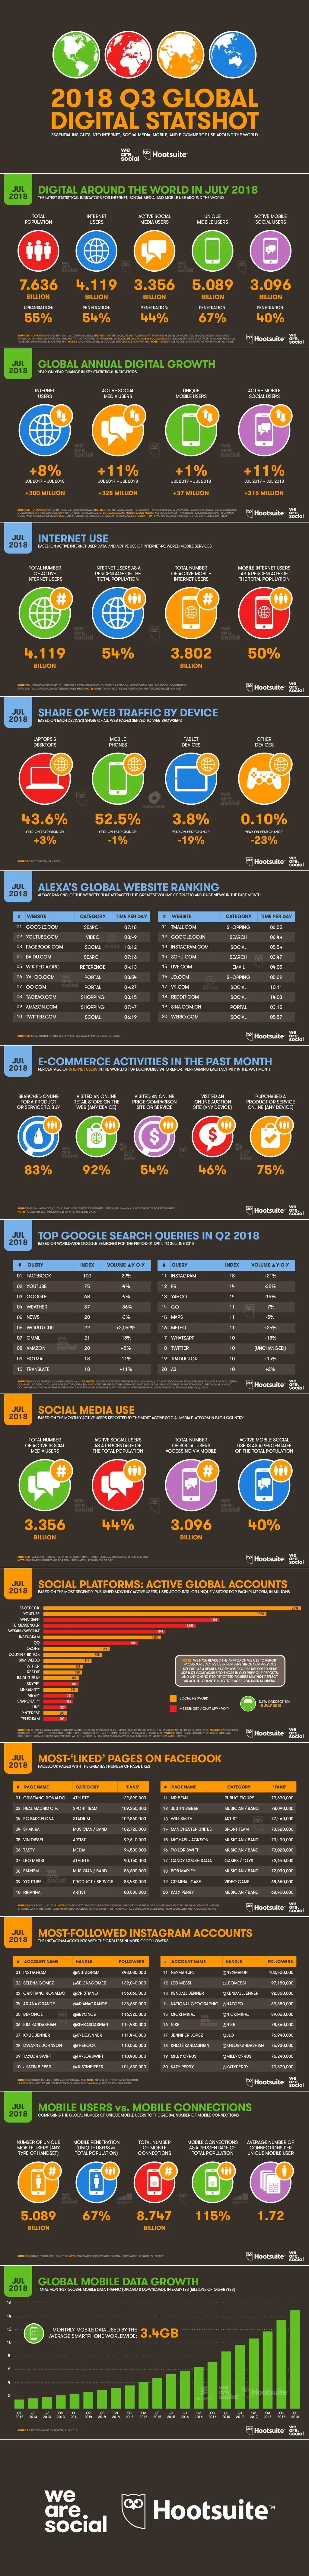 Digital in 2018: World's internet users pass the 4.1 billion mark - #infographic